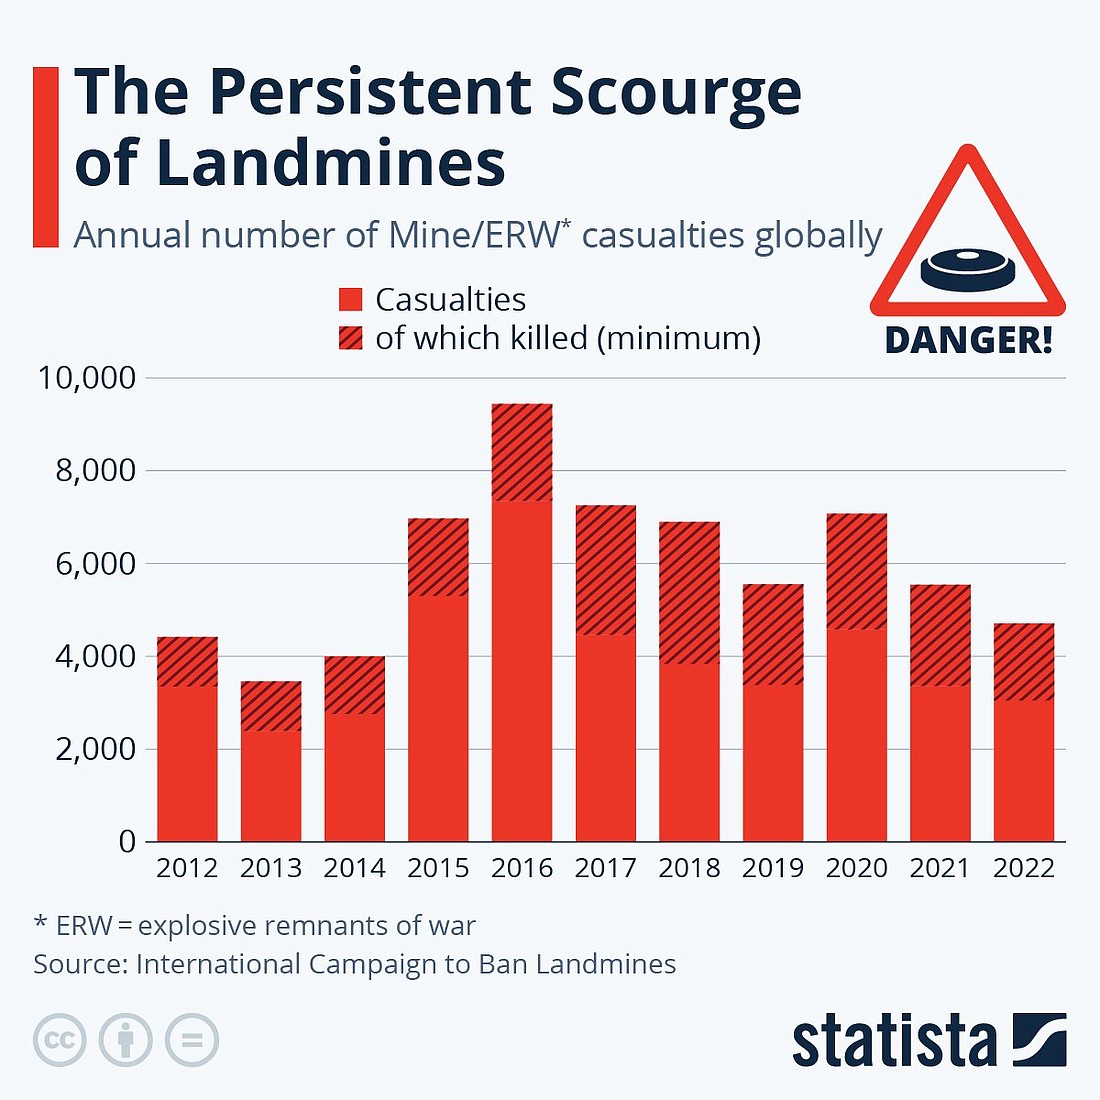 A graphic, entitled "The Persistent Scourge of Landmines," shows the global number of mine/explosive remnants of war casualties per year. Copyrighted work created by Statista available under Creative Commons attribution only license CC by 4.0 (CNS photo/Statista, CC by 4.0)..